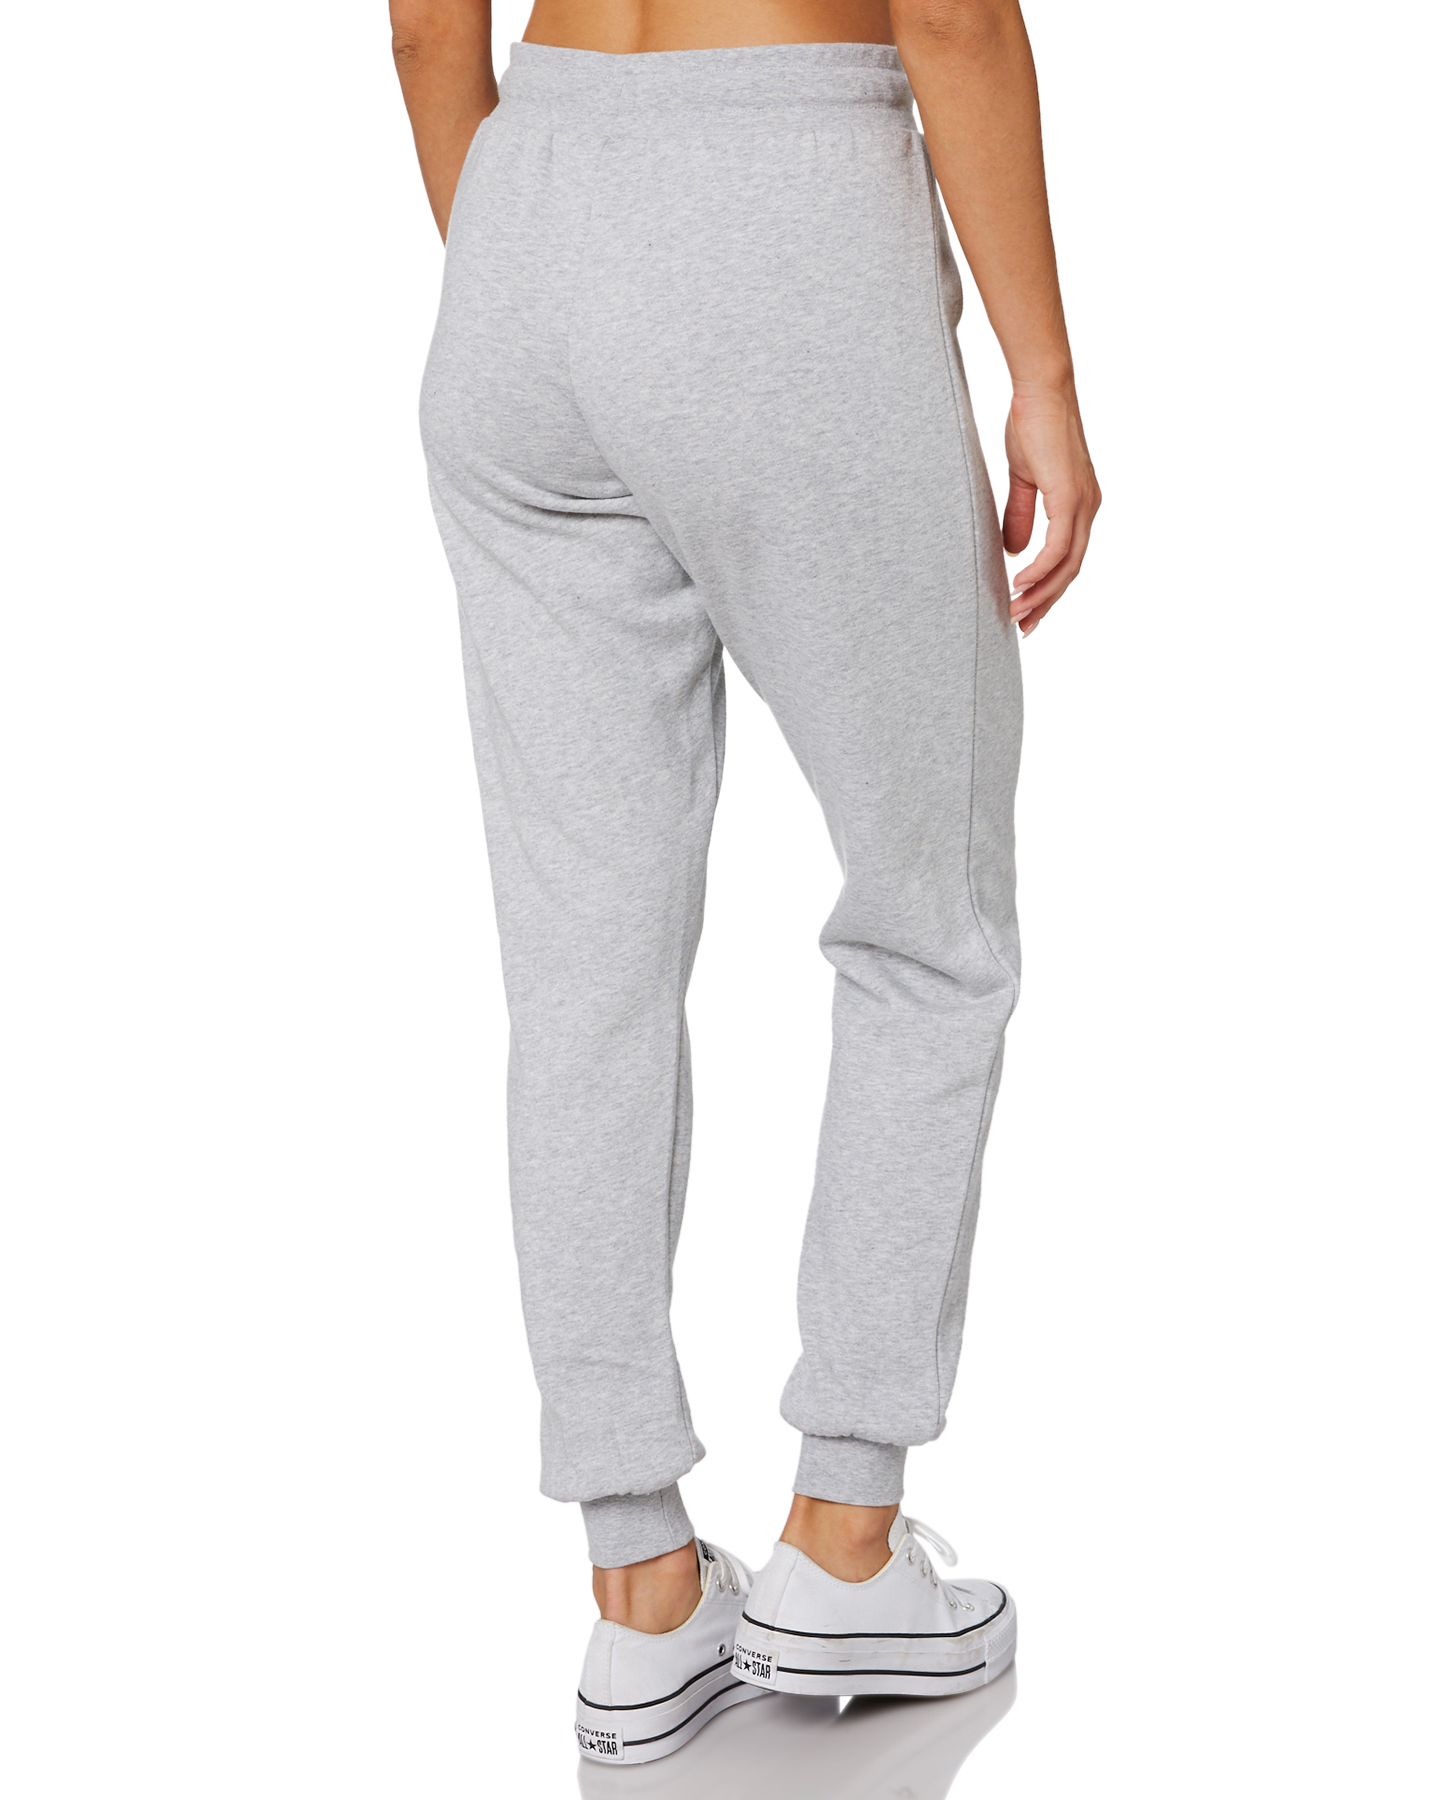 Rip Curl Classic Shore Track Pant - Light Grey Heather | SurfStitch